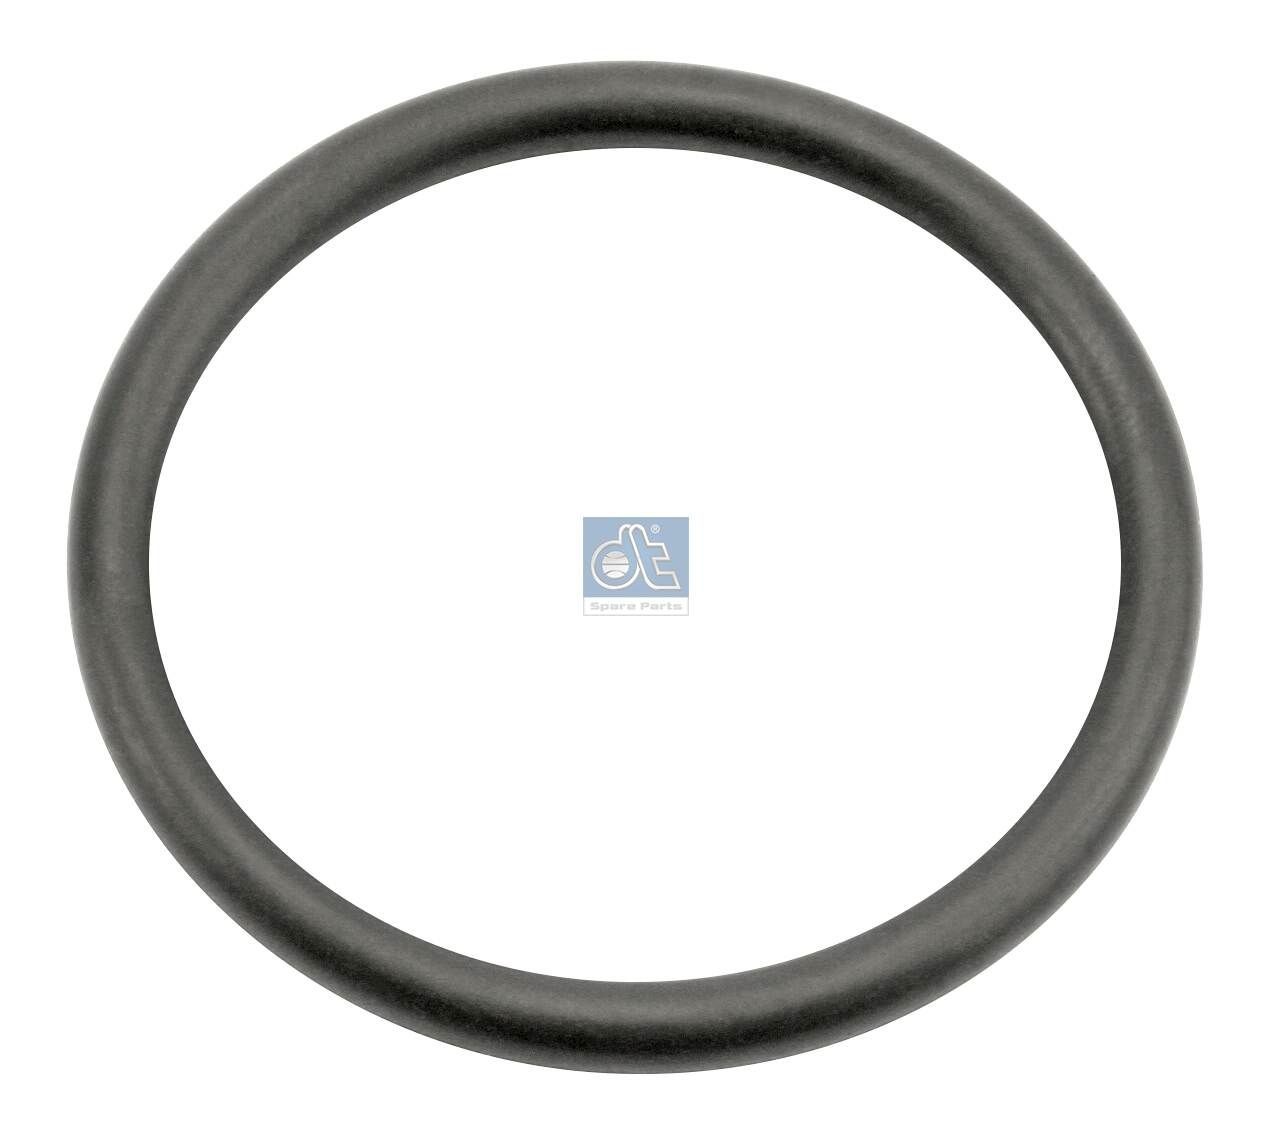 DT Spare Parts 54,2 x 5,7 mm, O-Ring, NBR (nitrile butadiene rubber) Seal Ring 1.12267 buy